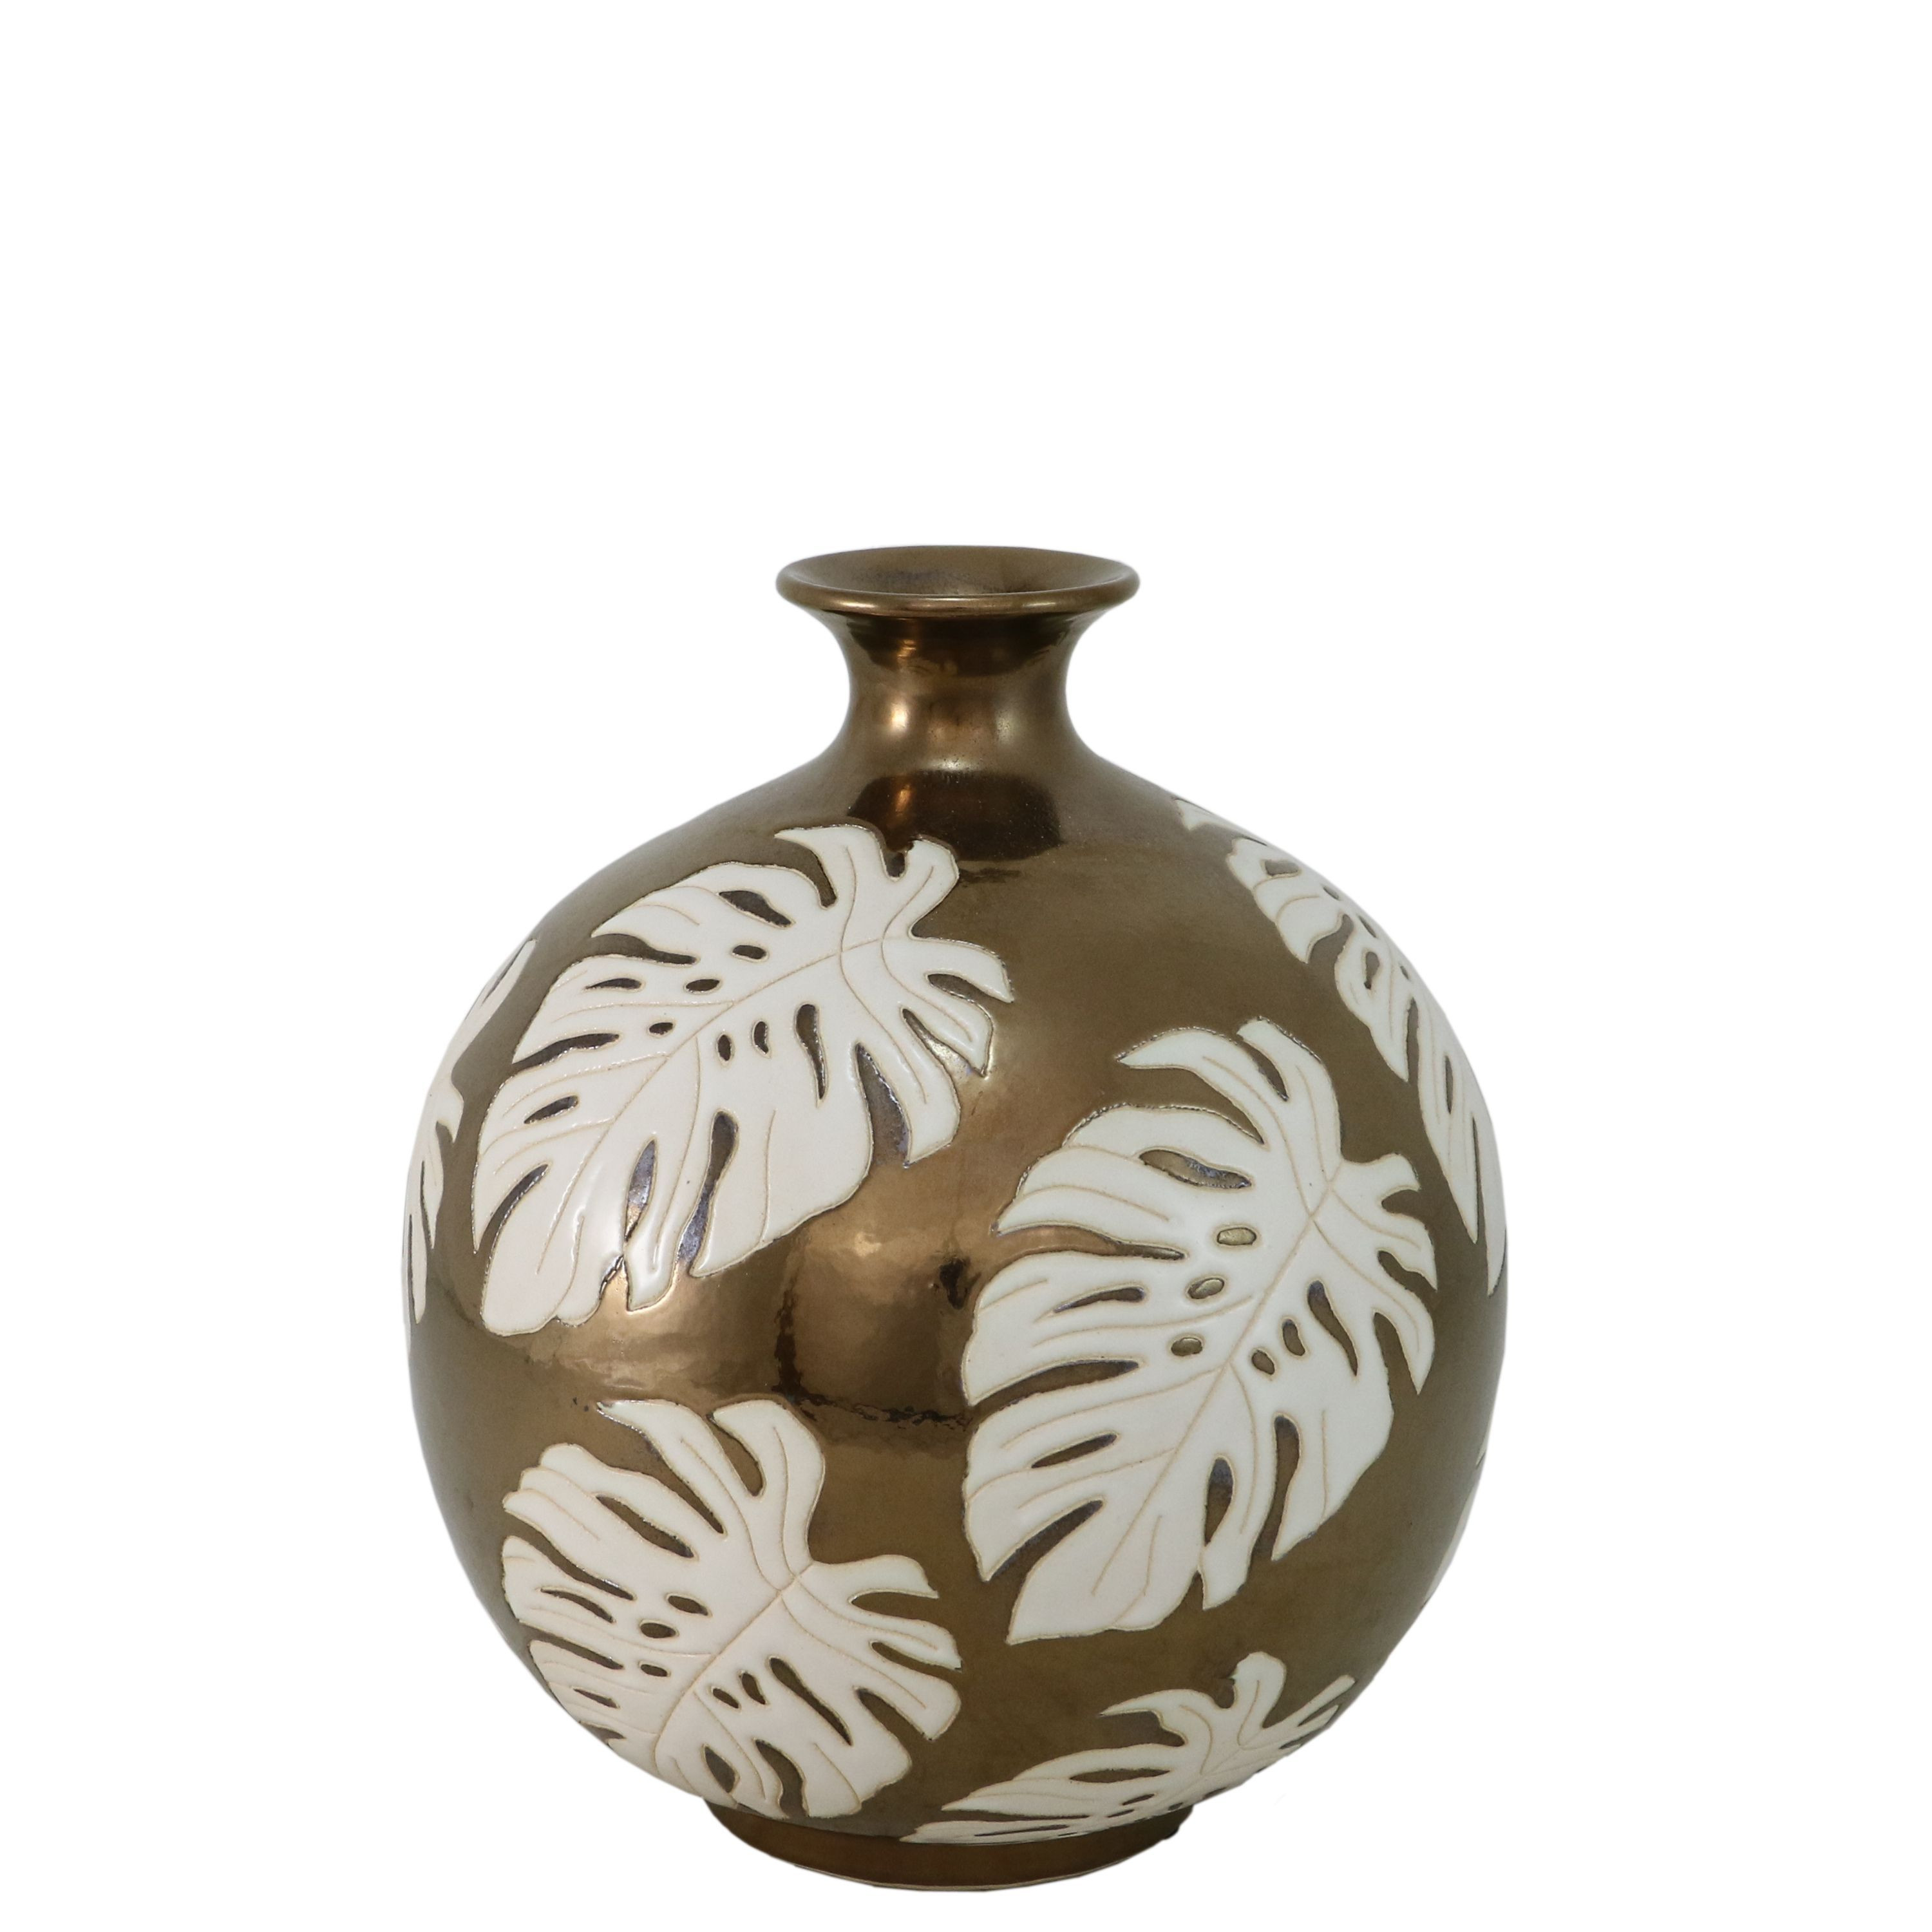 tiffany petals vase of 33 wayfair floor vases the weekly world pertaining to importcollection item 18 370 bali round vase